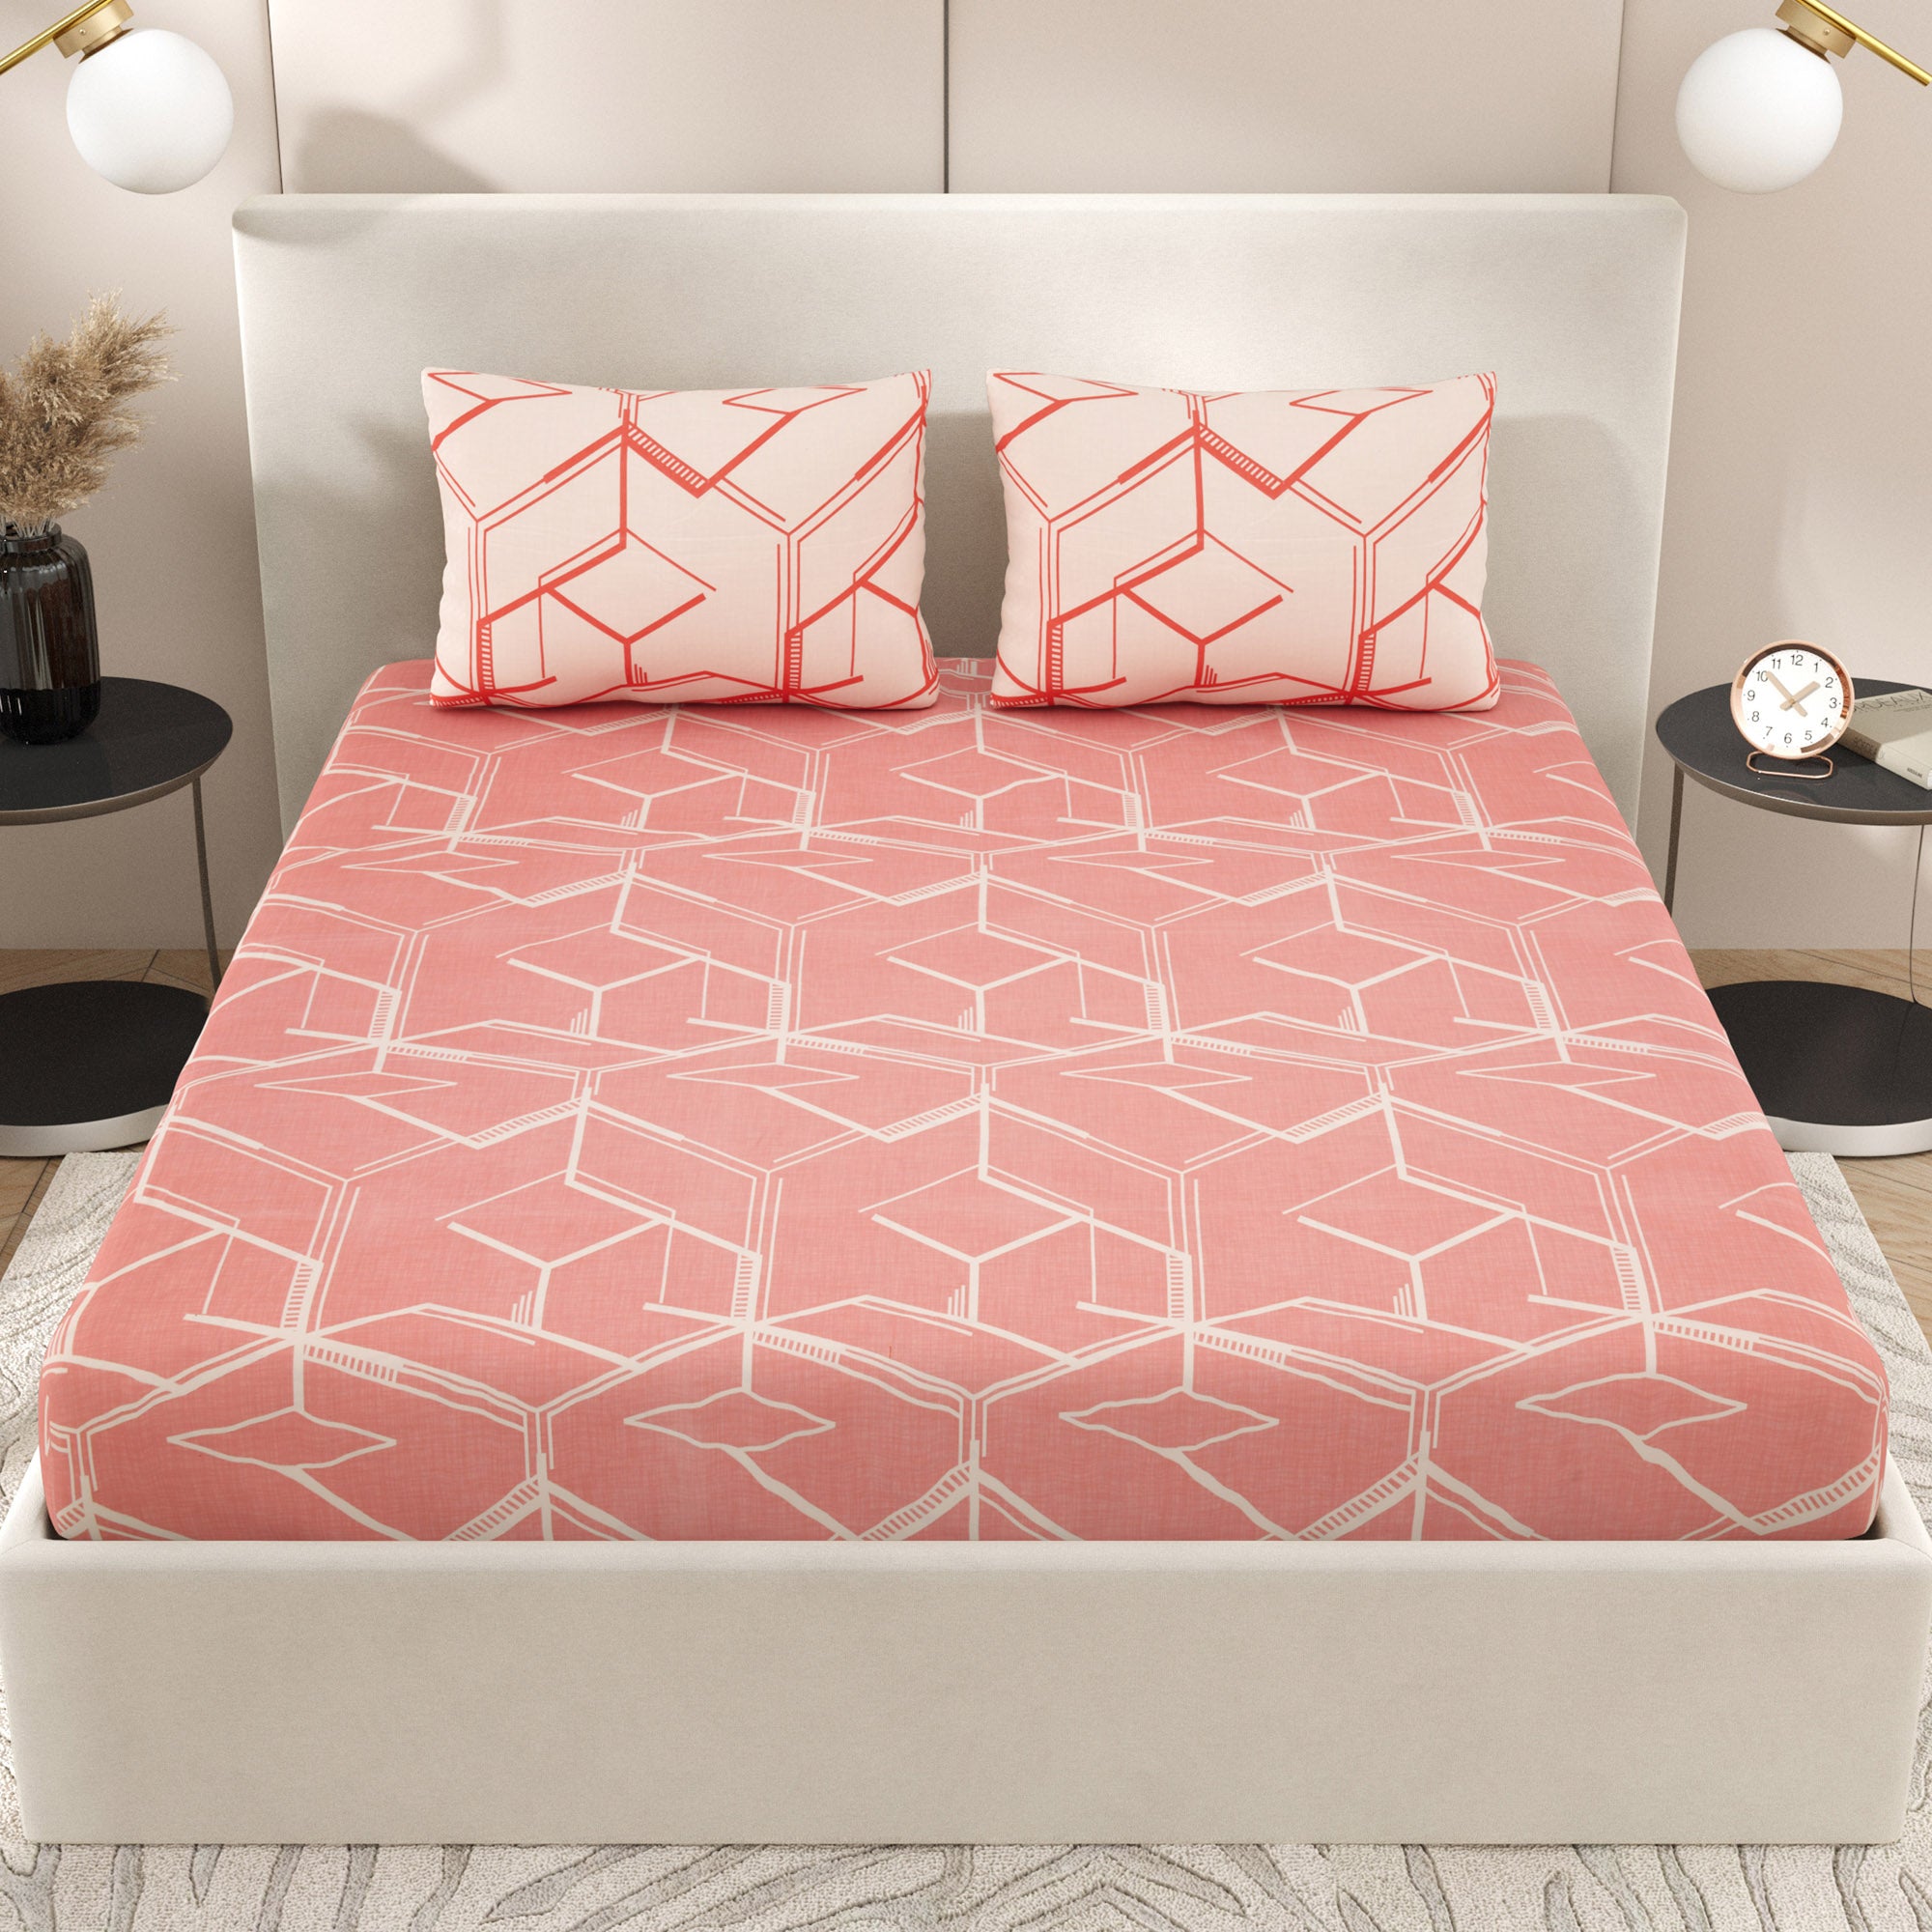 eCraftIndia 250 TC Rose Geometric Printed Cotton Double Bedsheet With 2 Pillow Covers